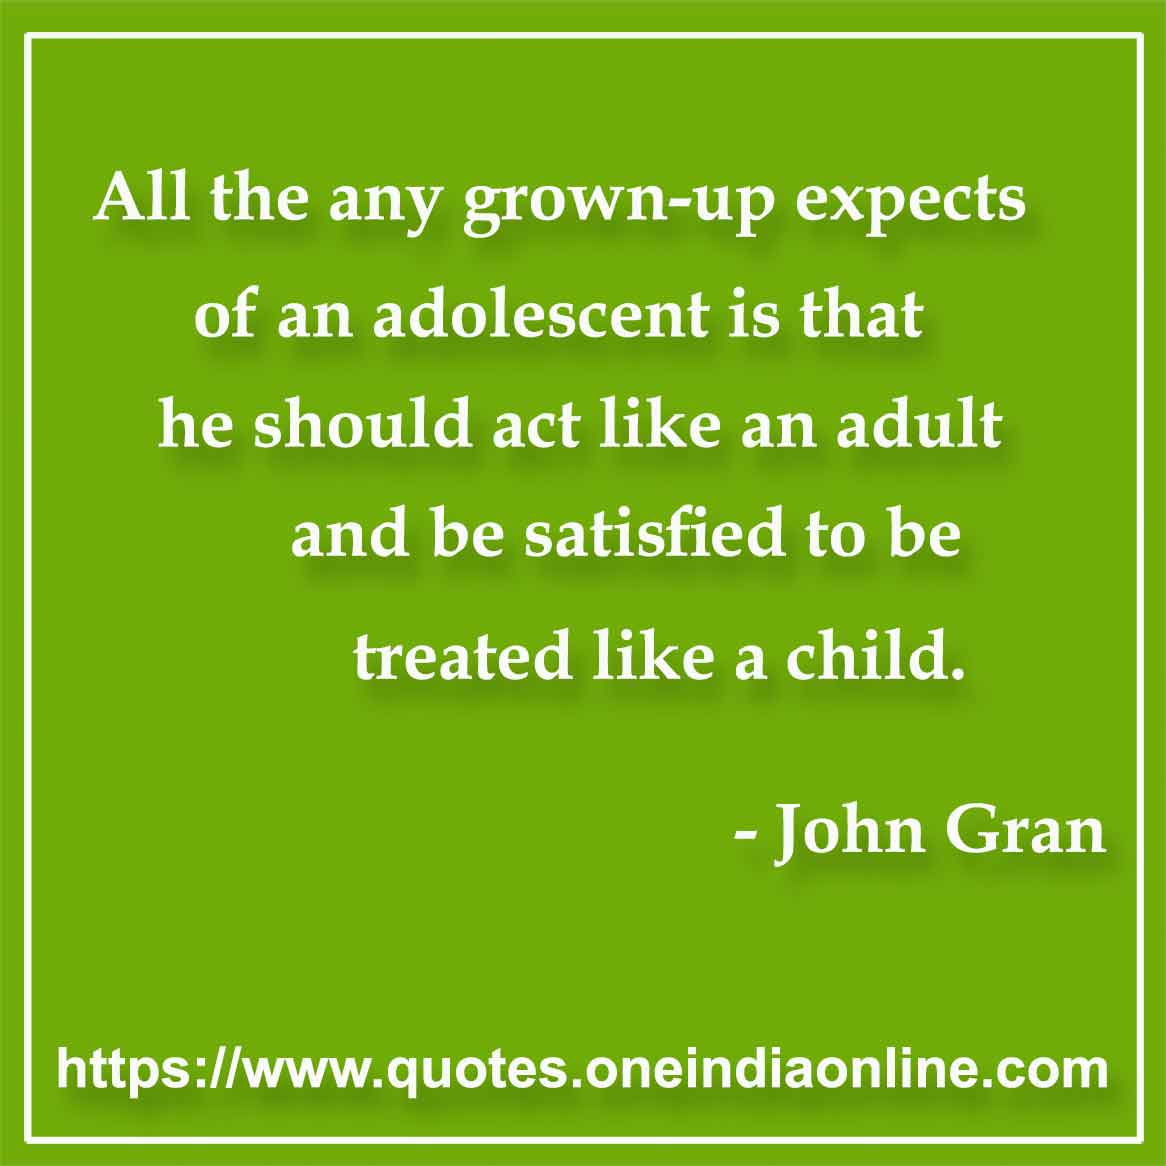 All the any grown-up expects of an adolescent is that he should act like an adult and be satisfied to be treated like a child.

- Adolescence Quote by John Gran